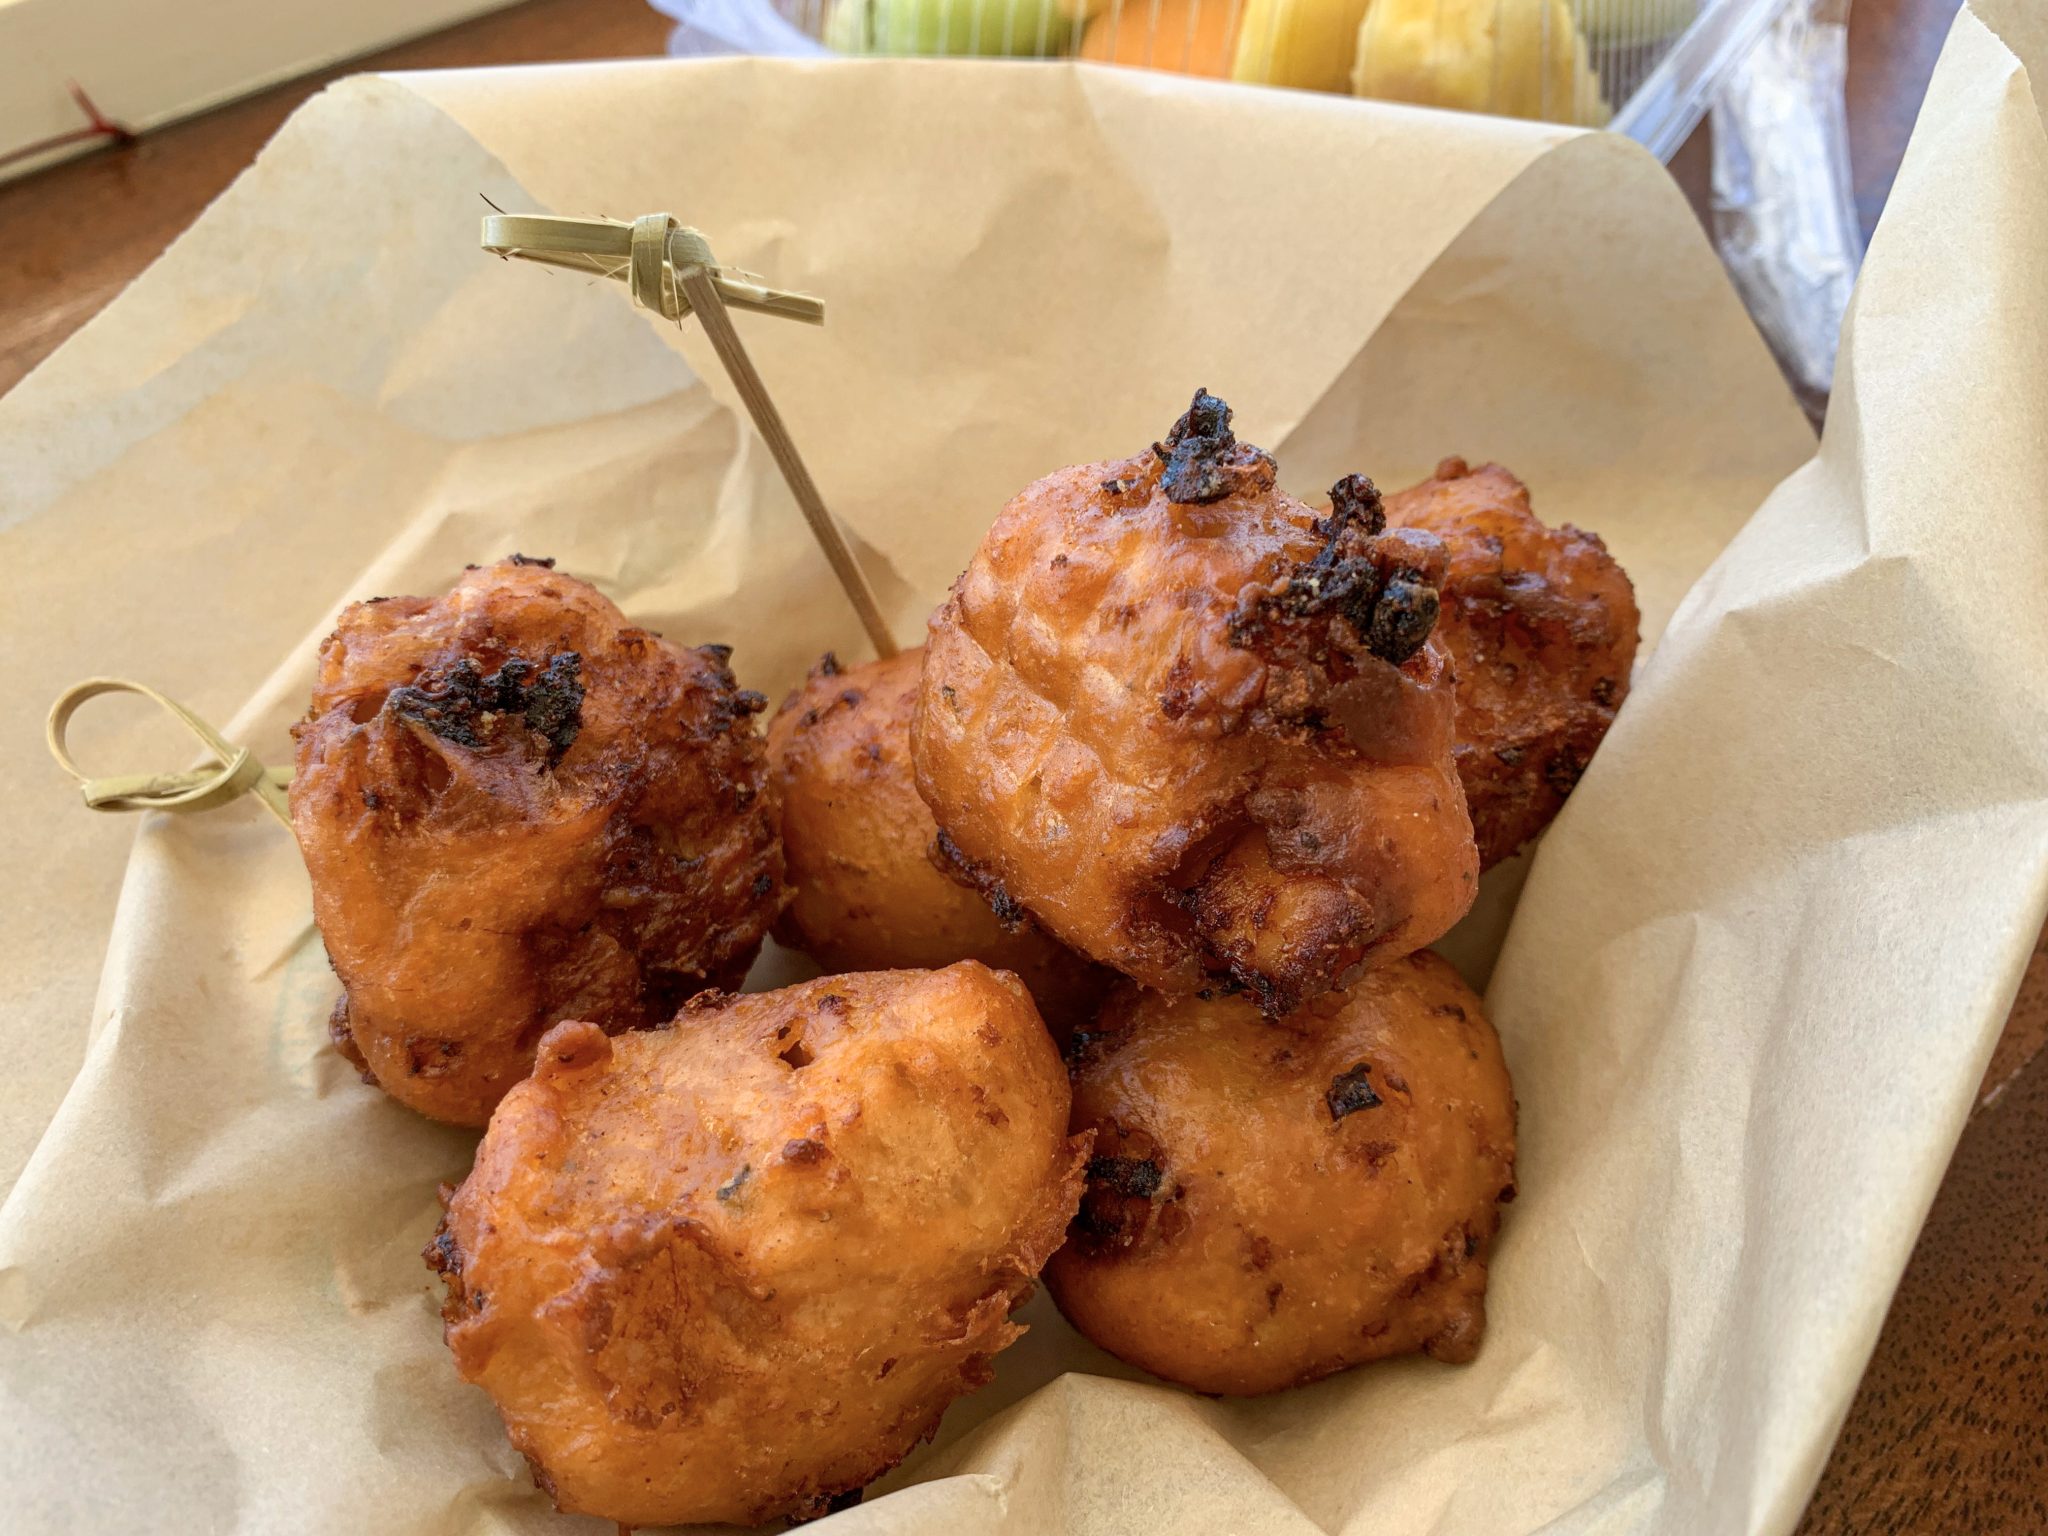 Conch fritters in a basket